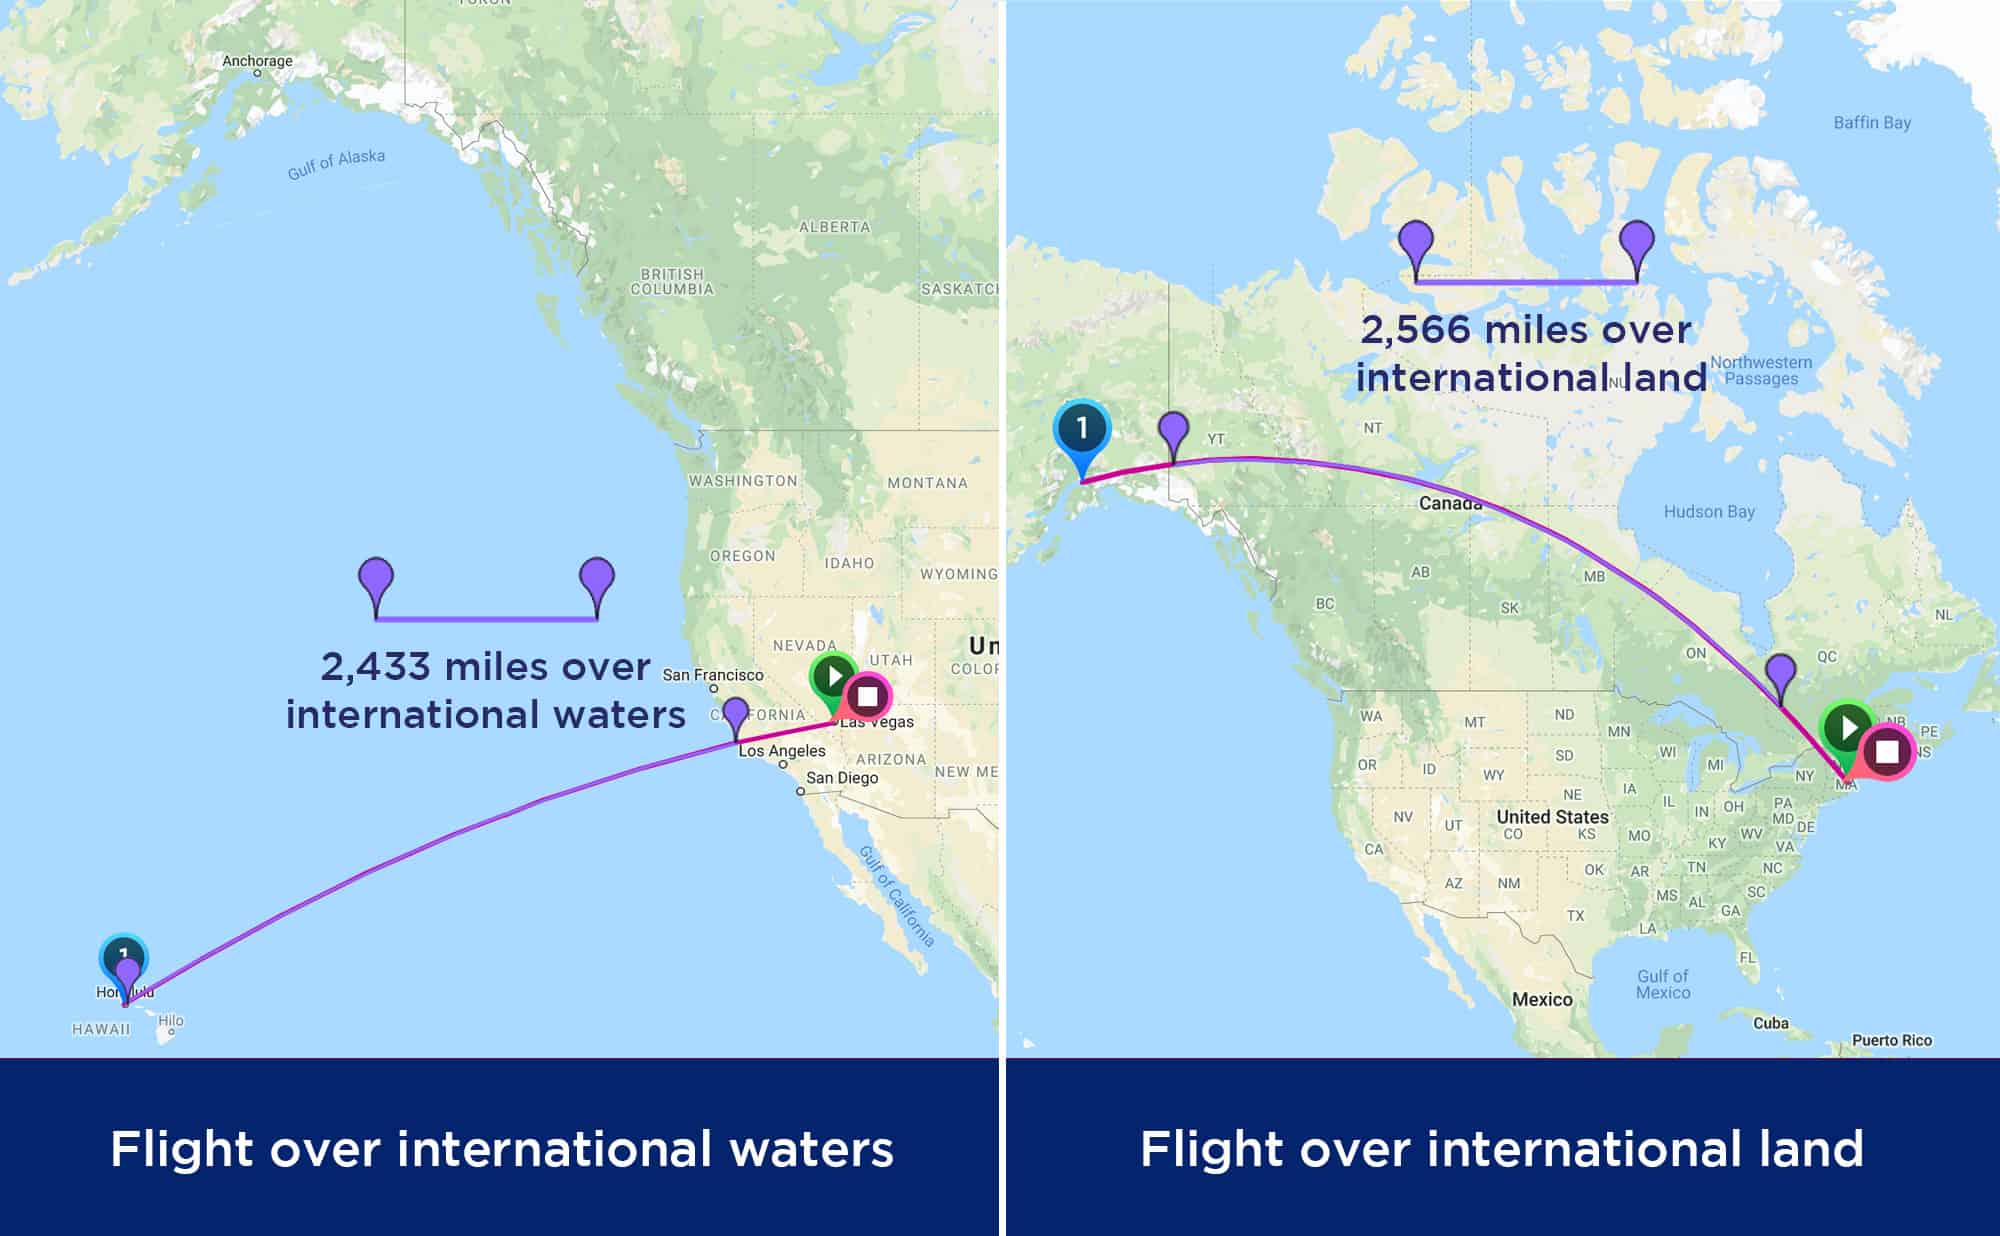 Map of flights over international water and international land